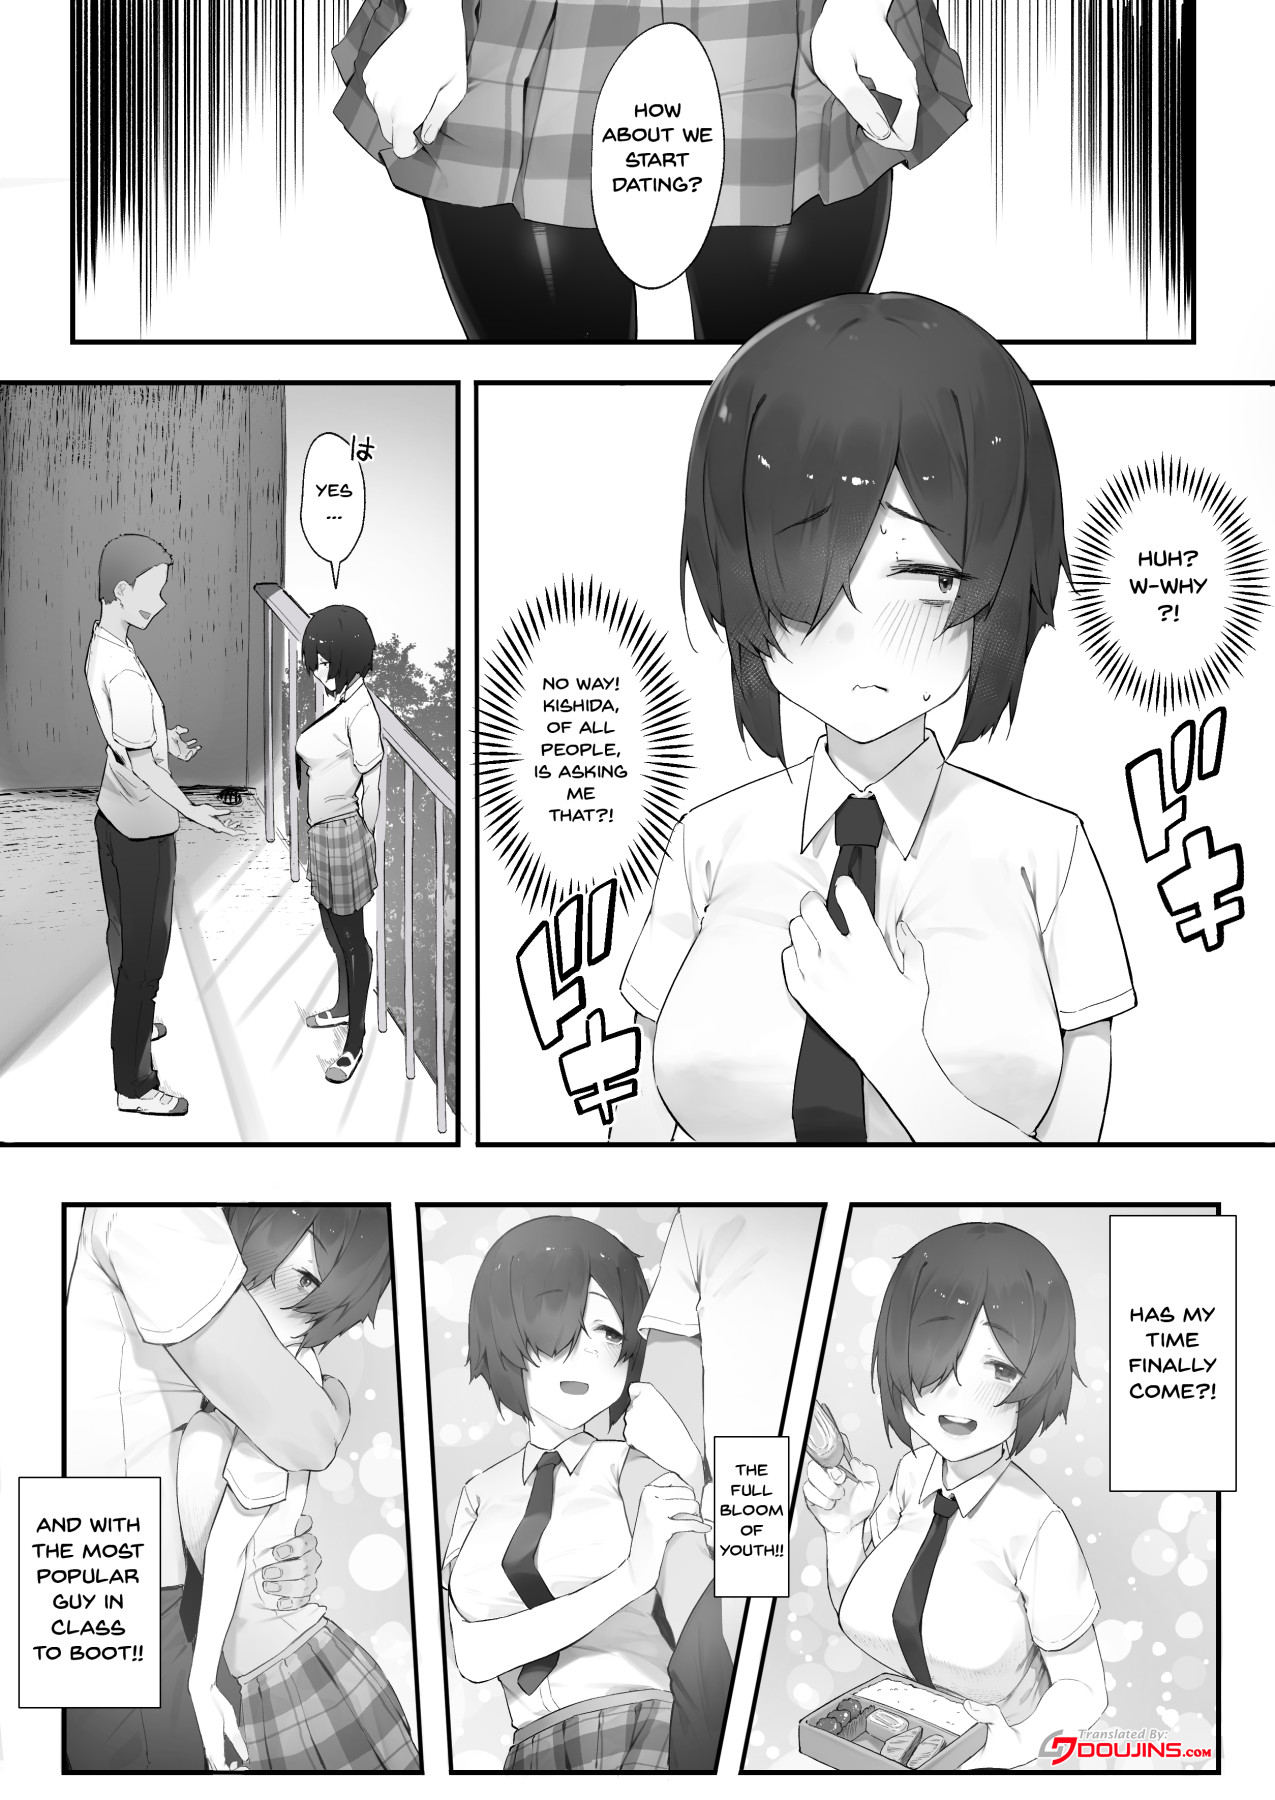 Hentai Manga Comic-The Springtime Of Youth Has Come For Me An Asocial Person - Continued (Full)-Read-1